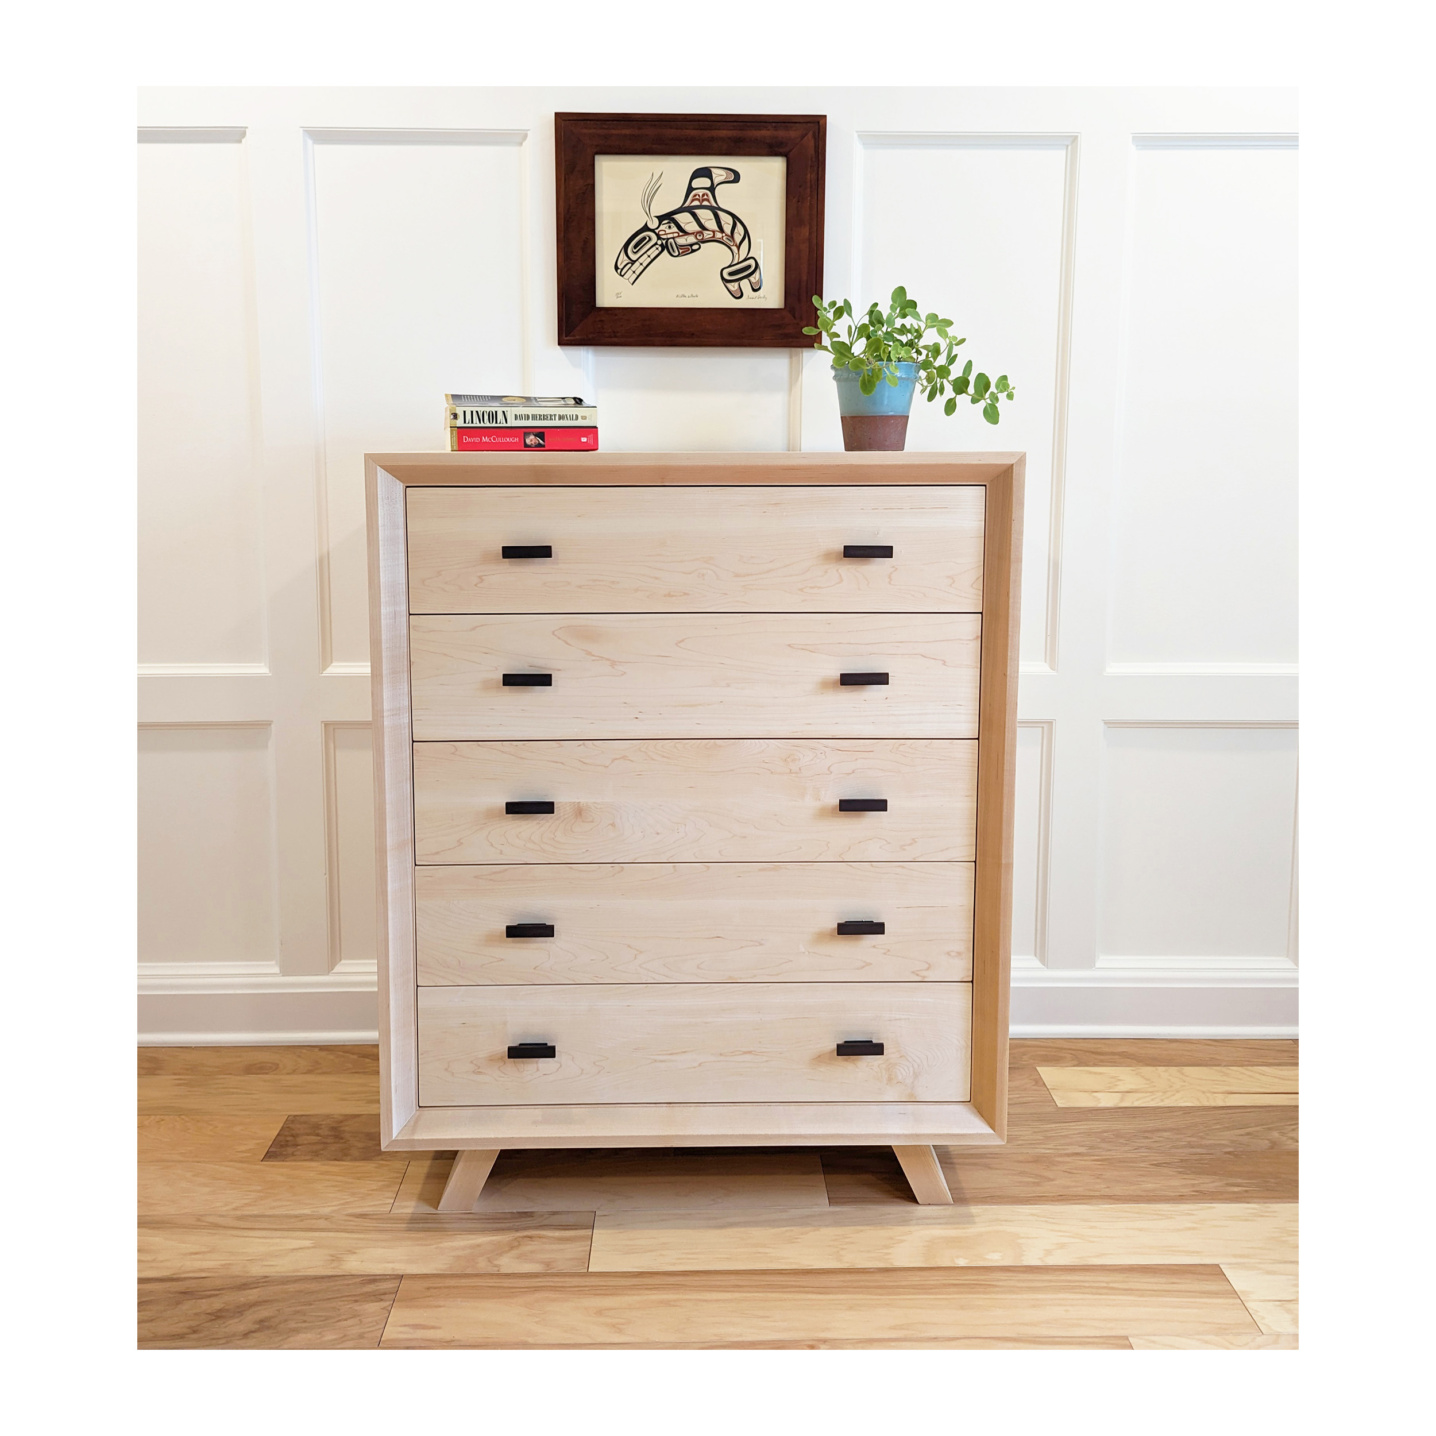 Tall dresser constructed of maple wood